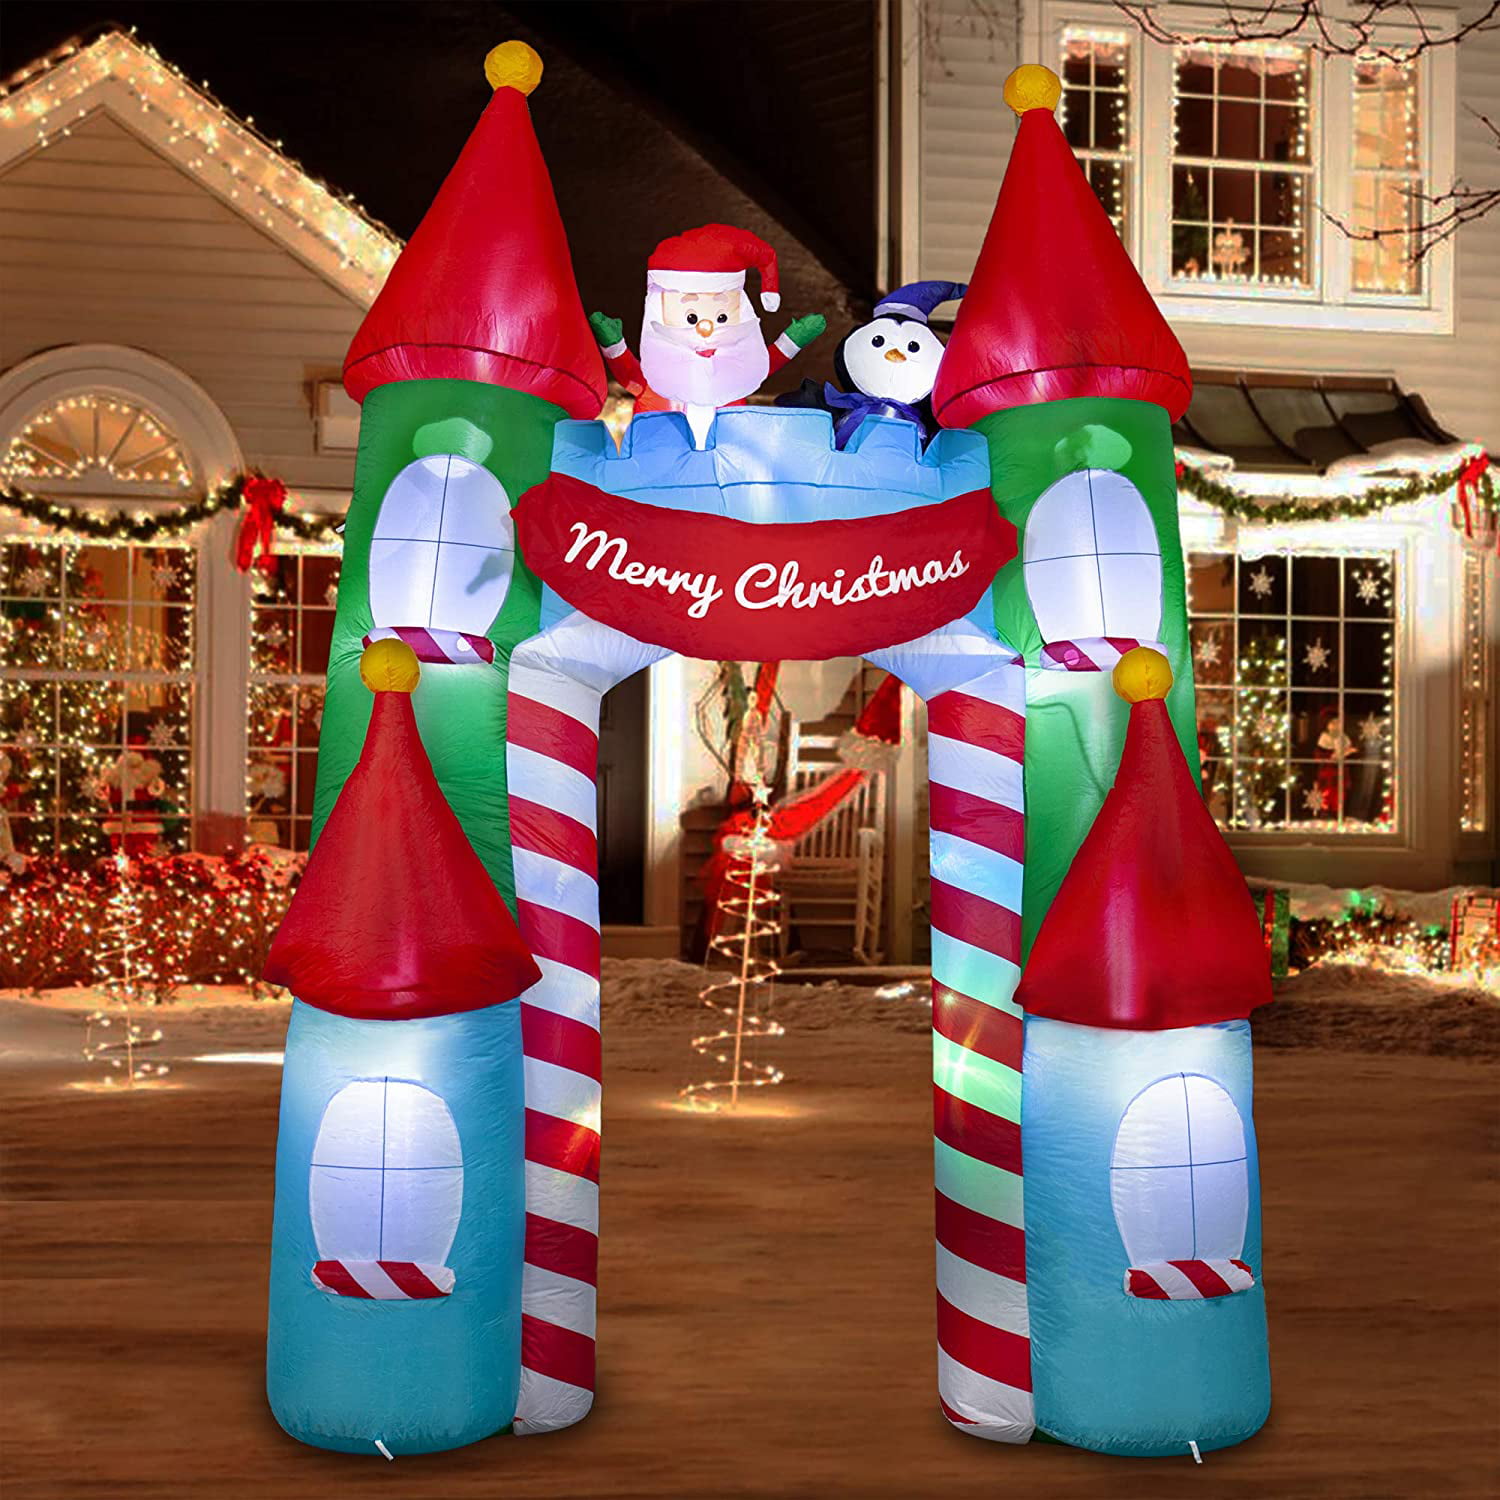 Christmas Castle Decoration Outdoor - We offer the best selection at ...